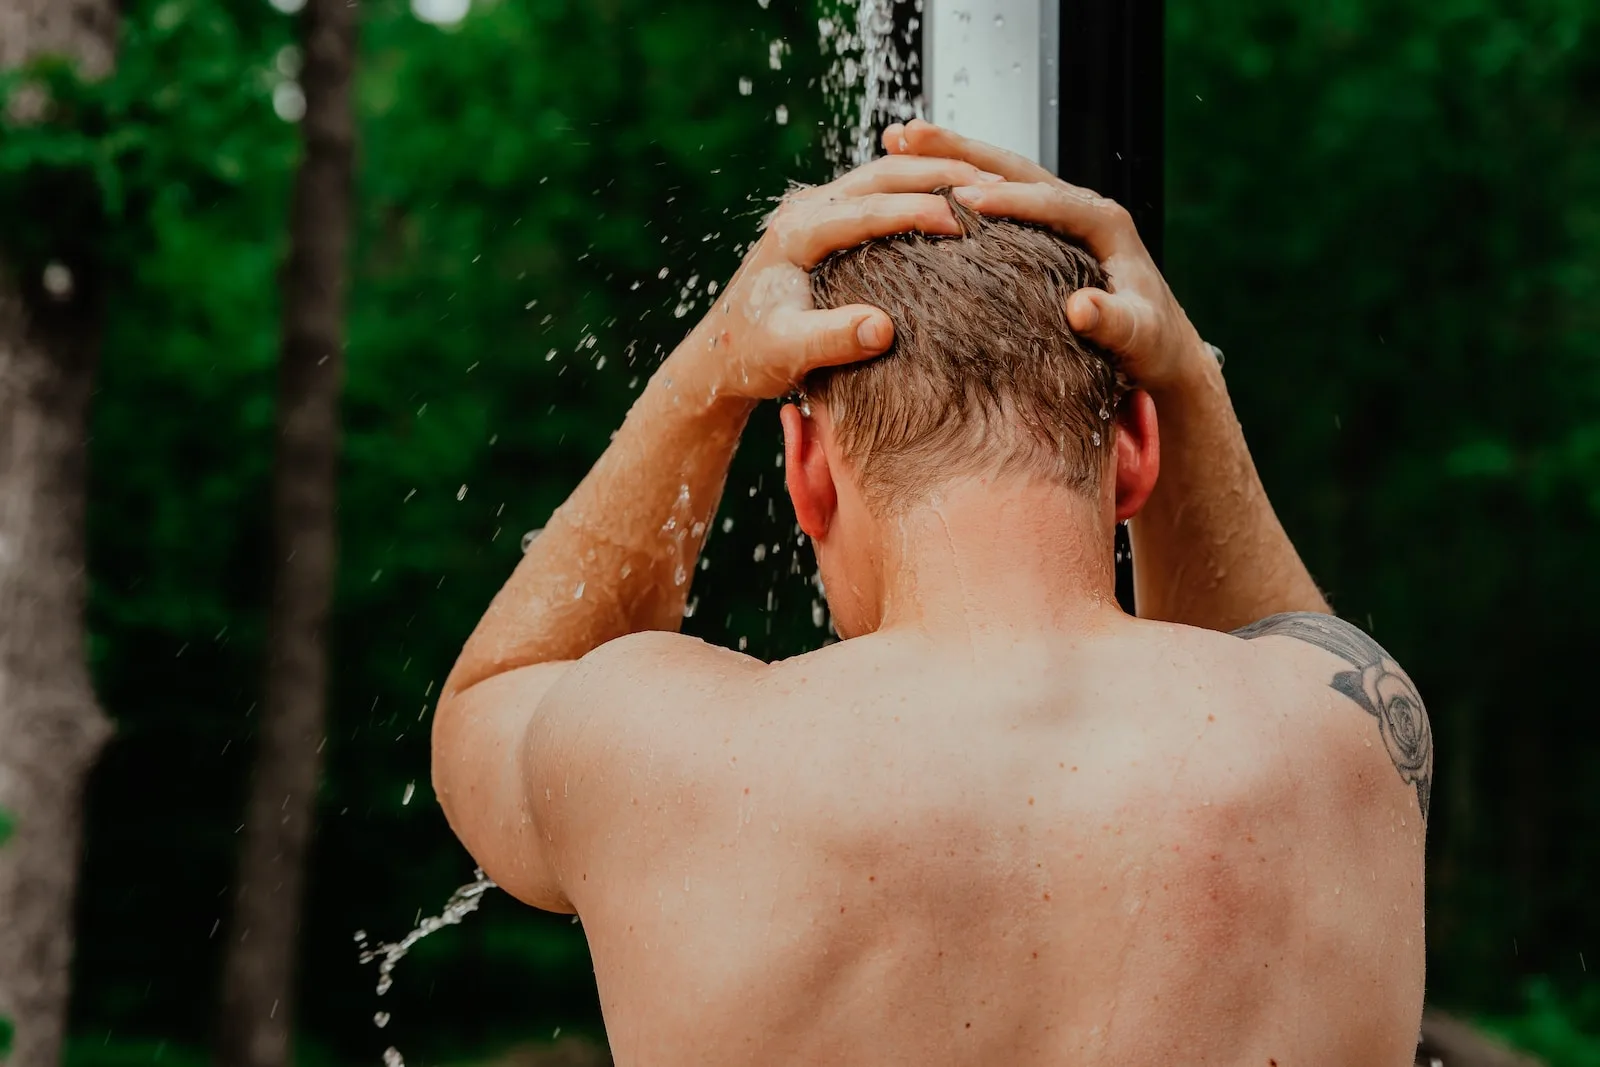 A Person With The Hands On The Head Enjoying The Hot Water From Their Water Heater